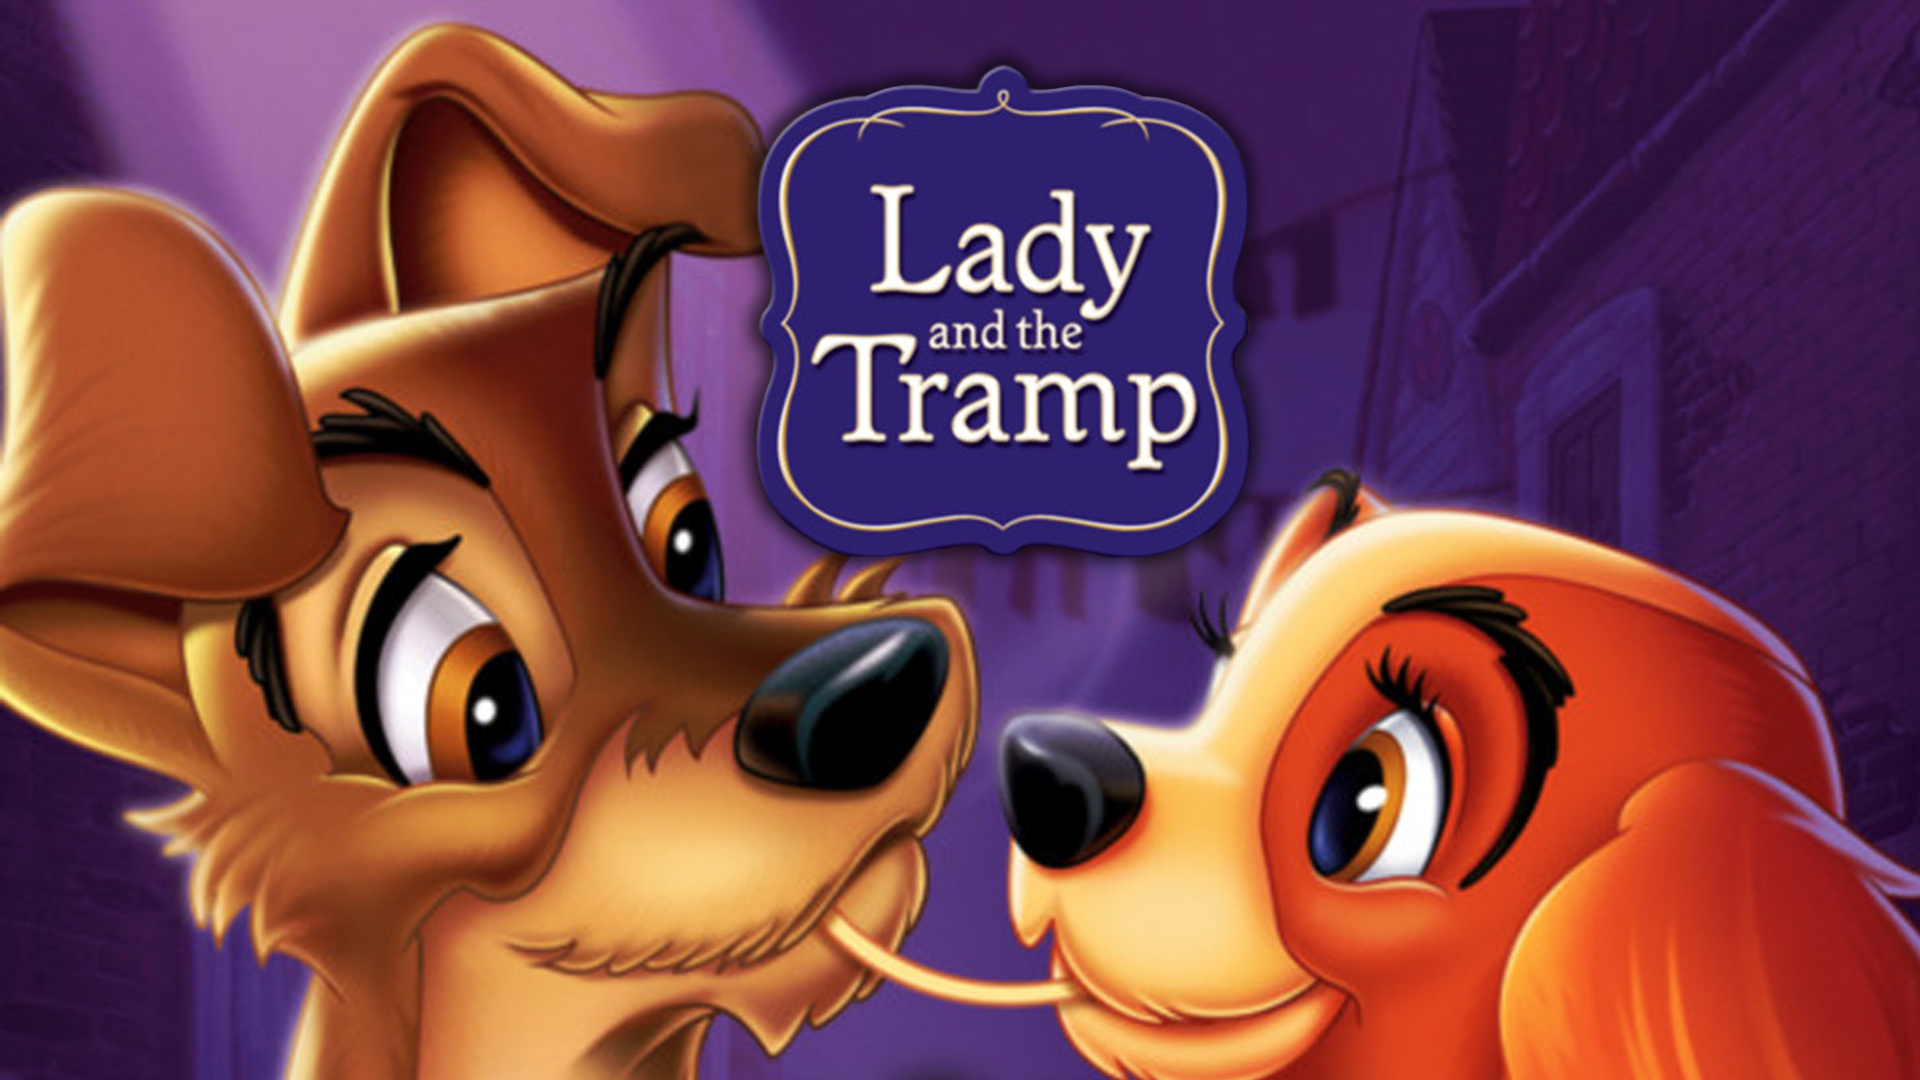 Lady and the Tramp, 1955 Radio Times, Disney animated film, Iconic romantic tale, 1920x1080 Full HD Desktop